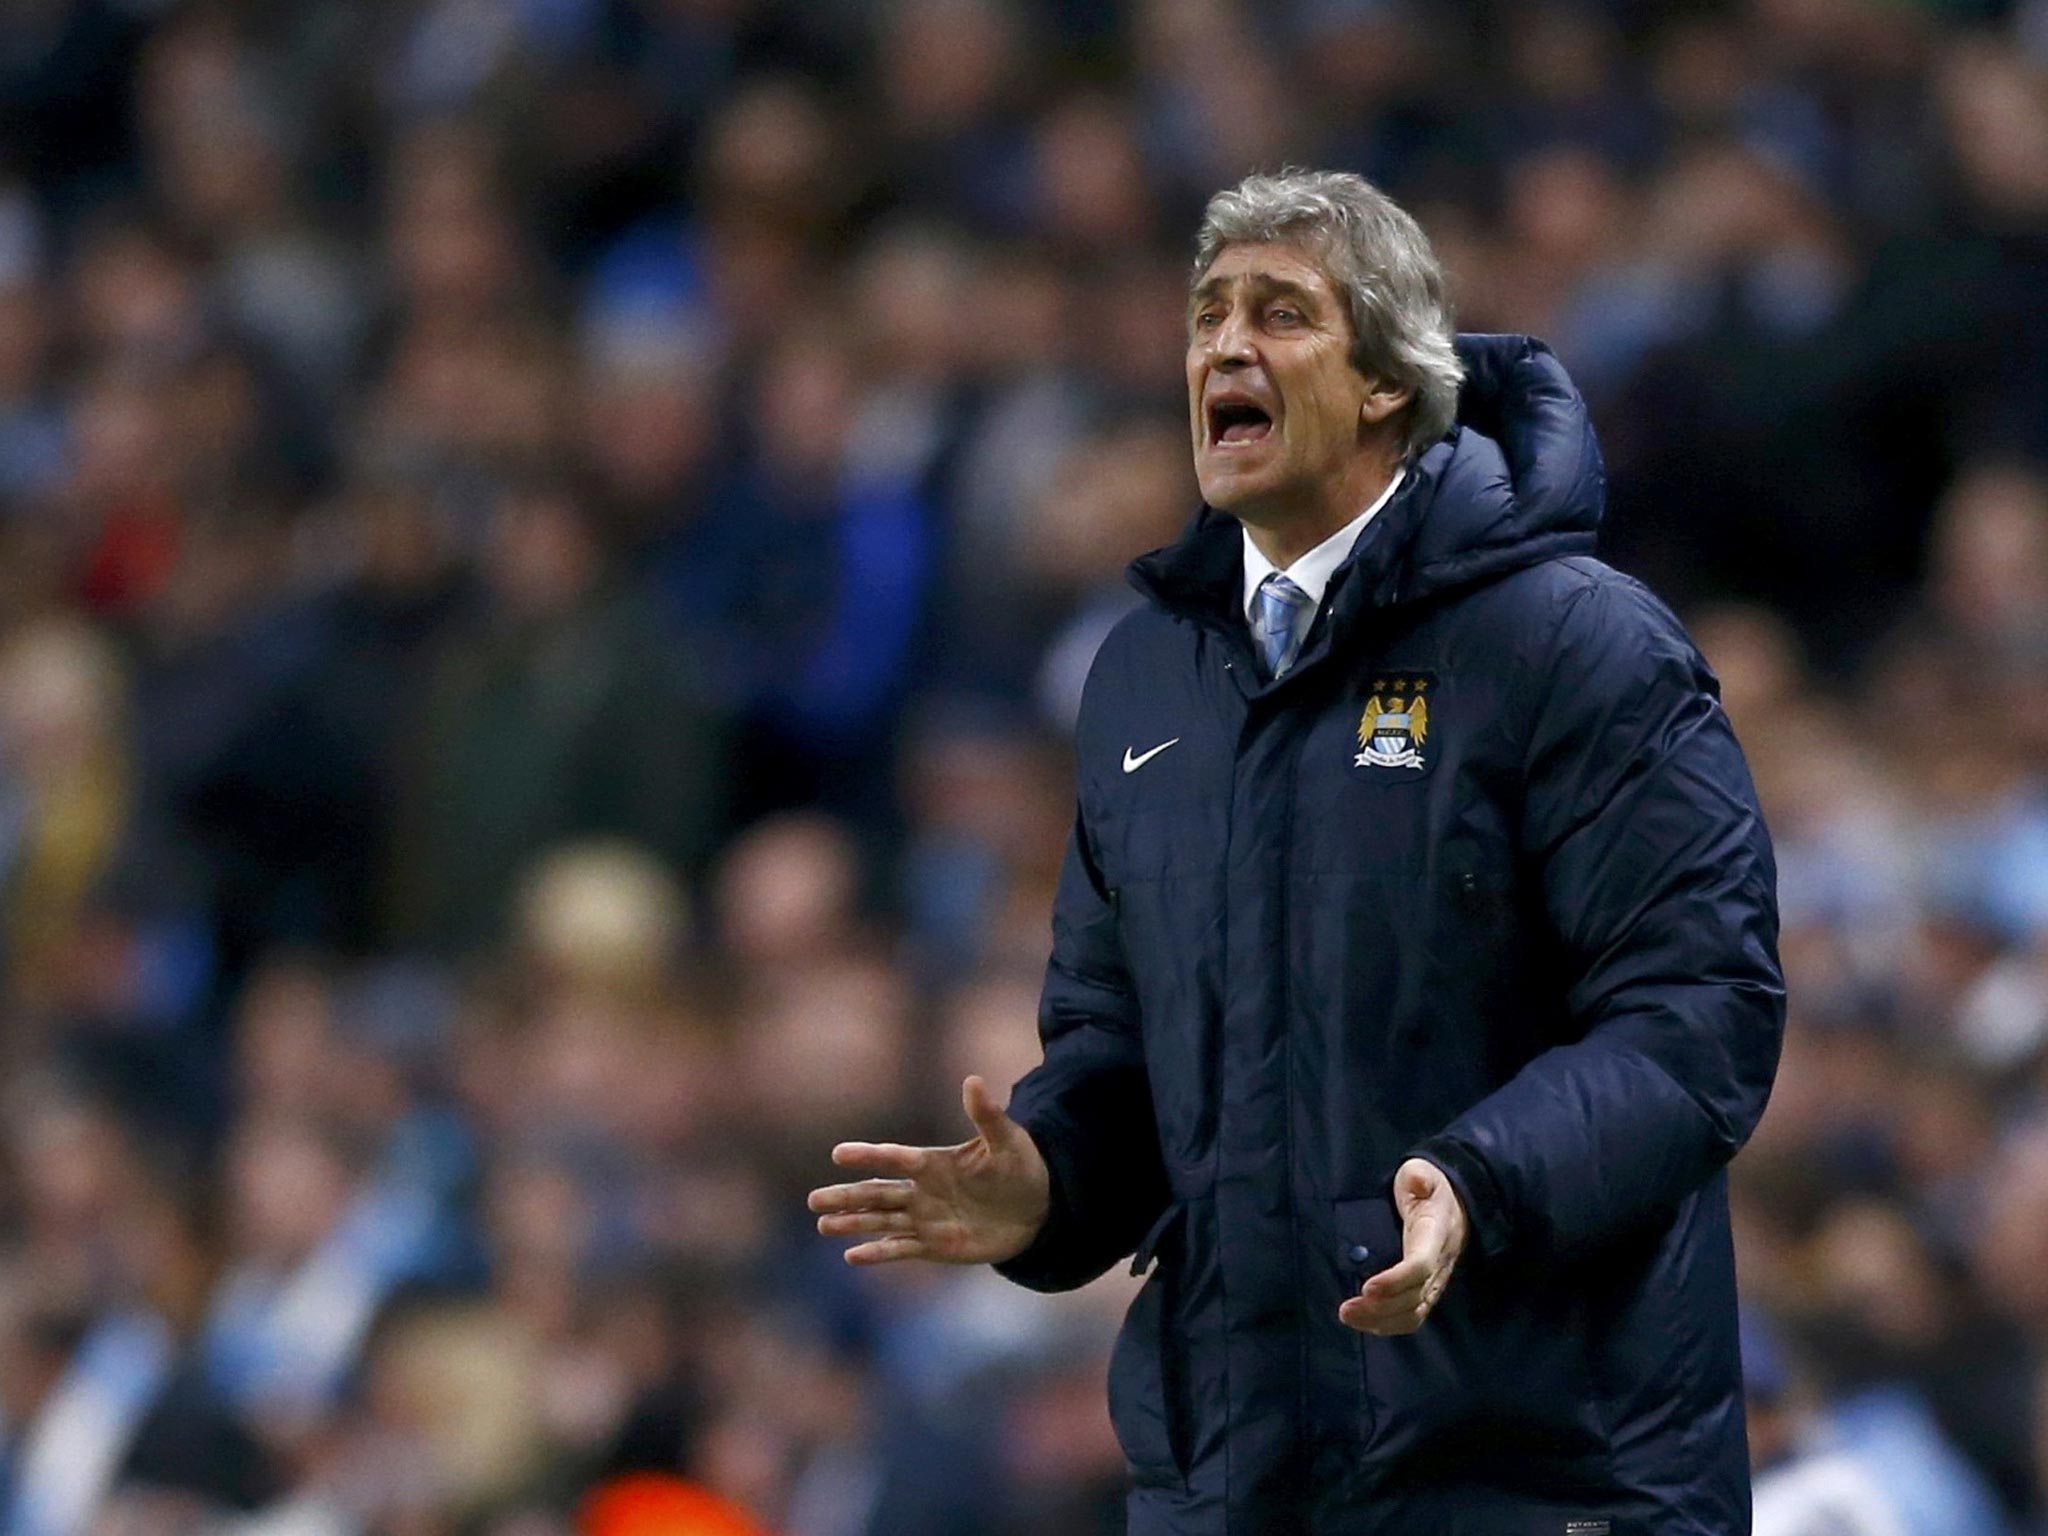 Manuel Pellegrini make a gesture from the touchline